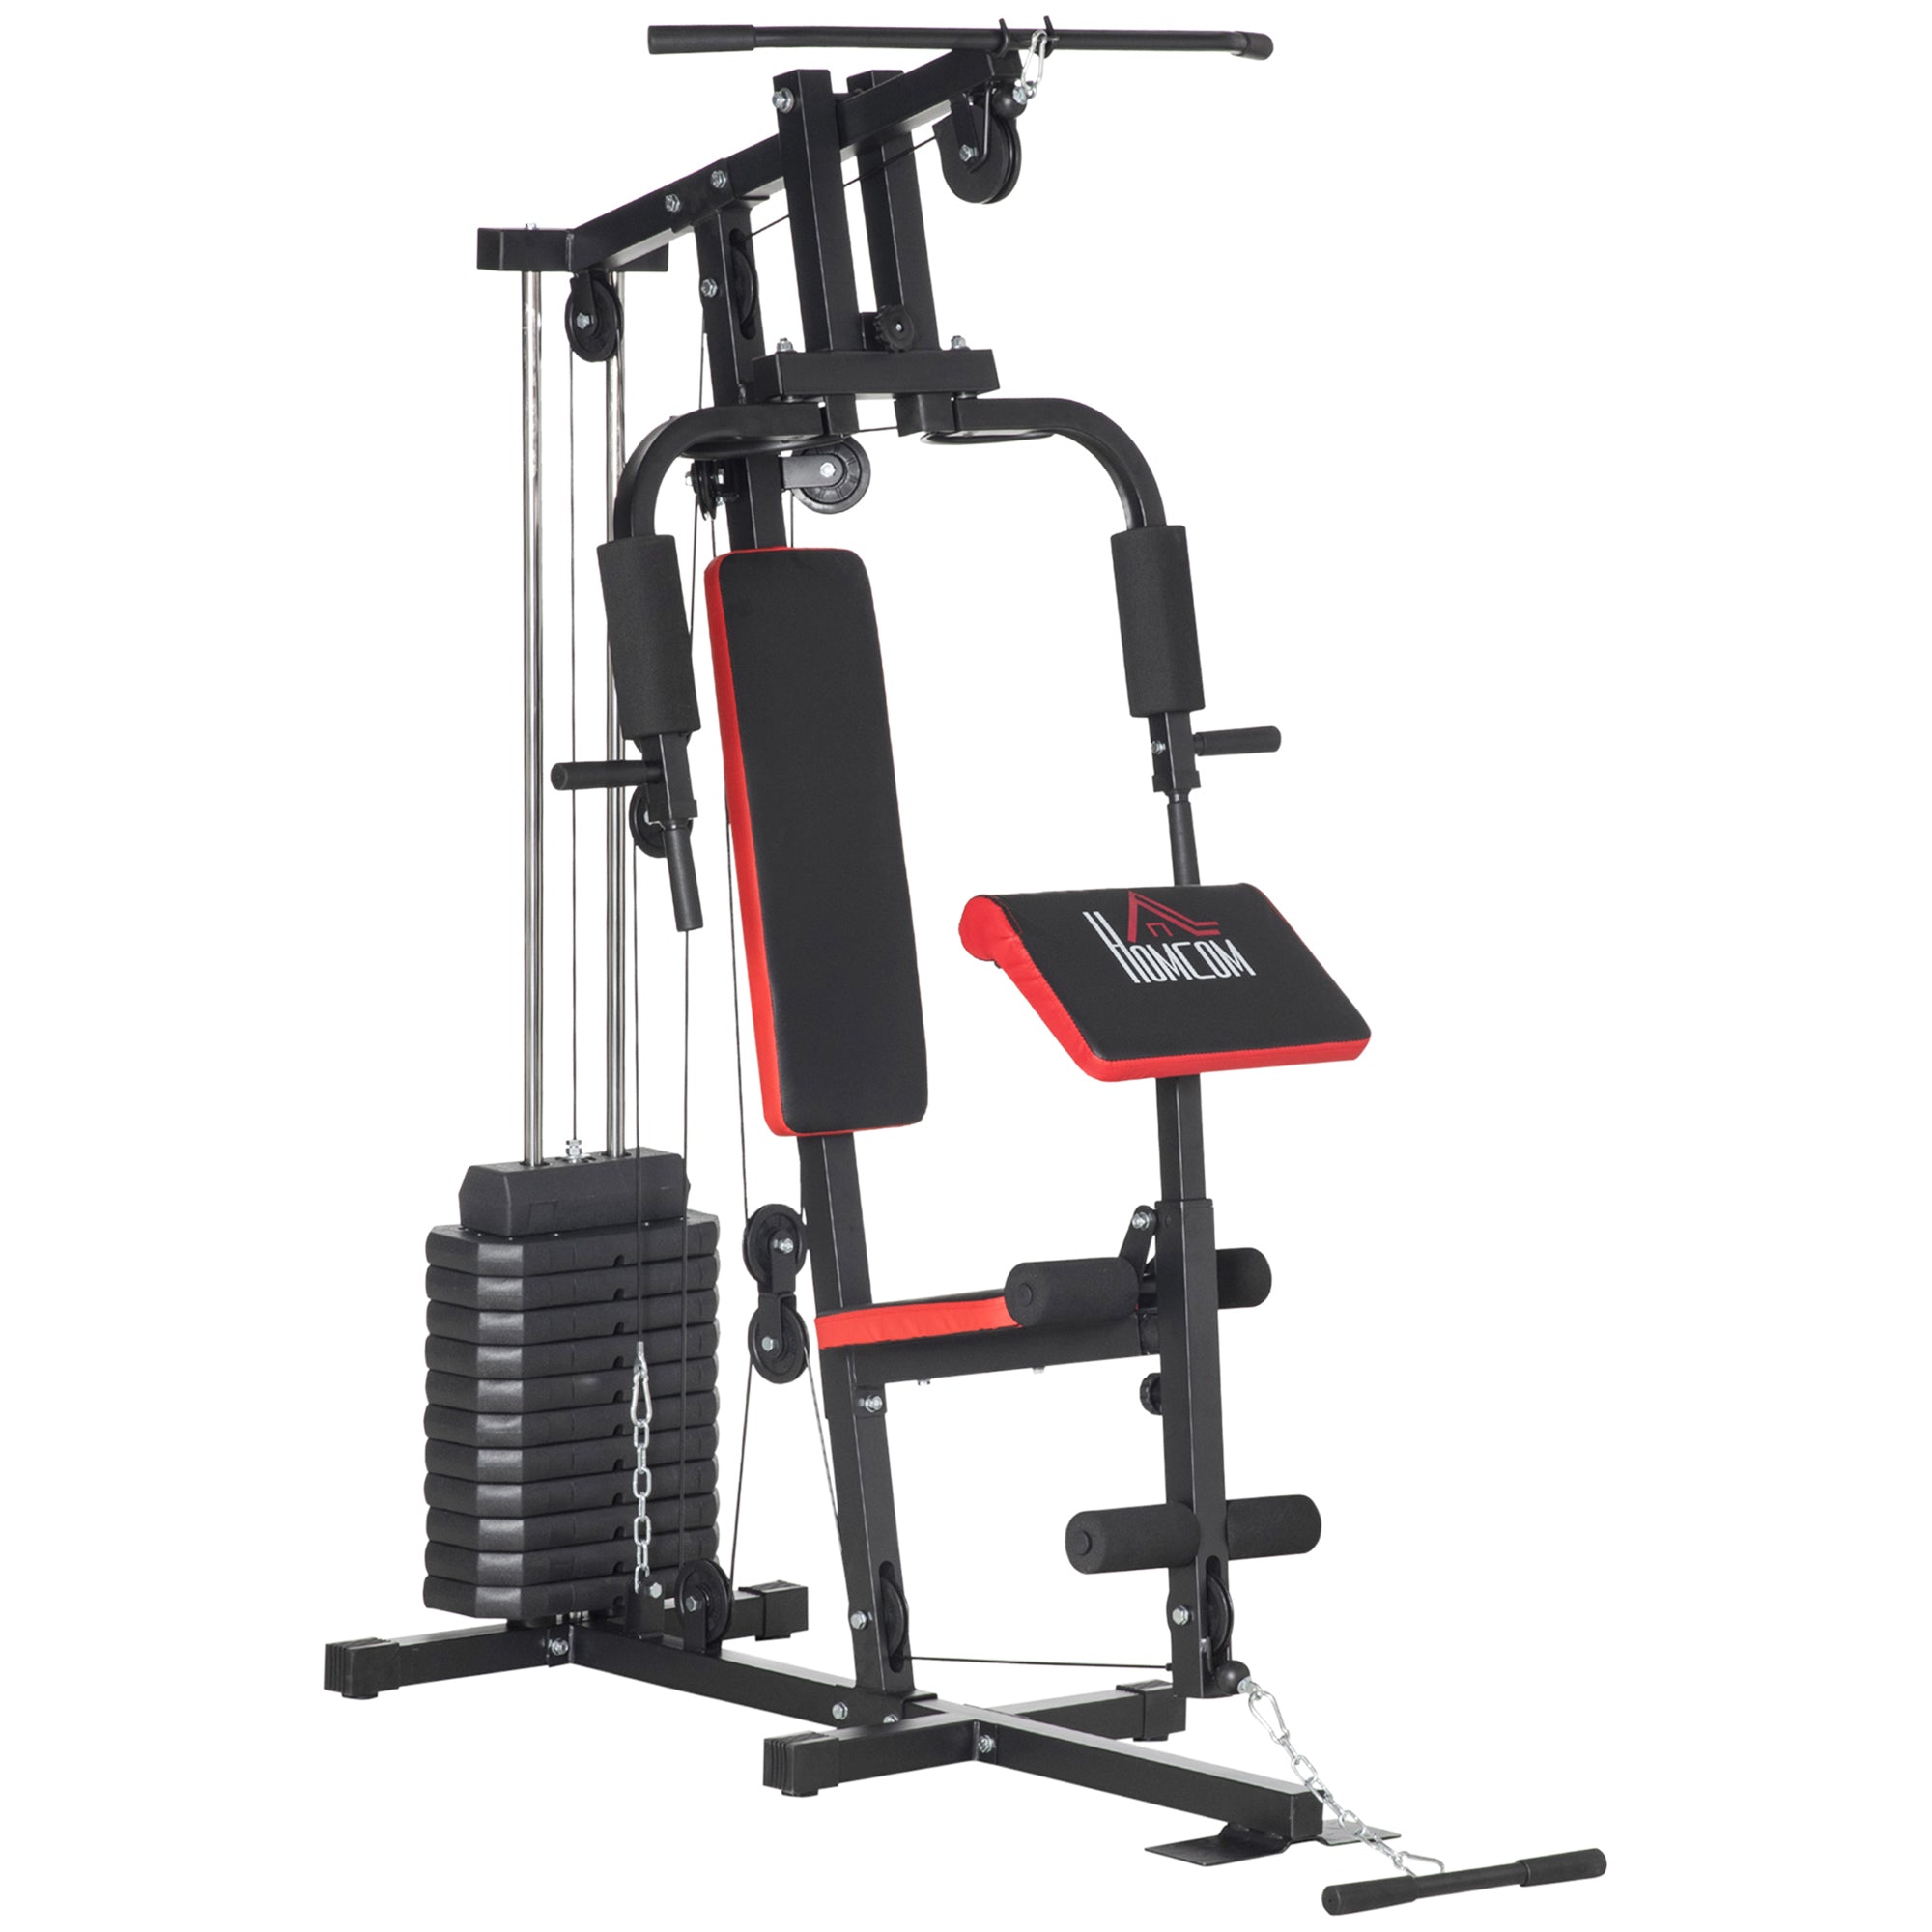 Multi Home Gym Machine with 66Kg Weight Stack for Workout Strength Training